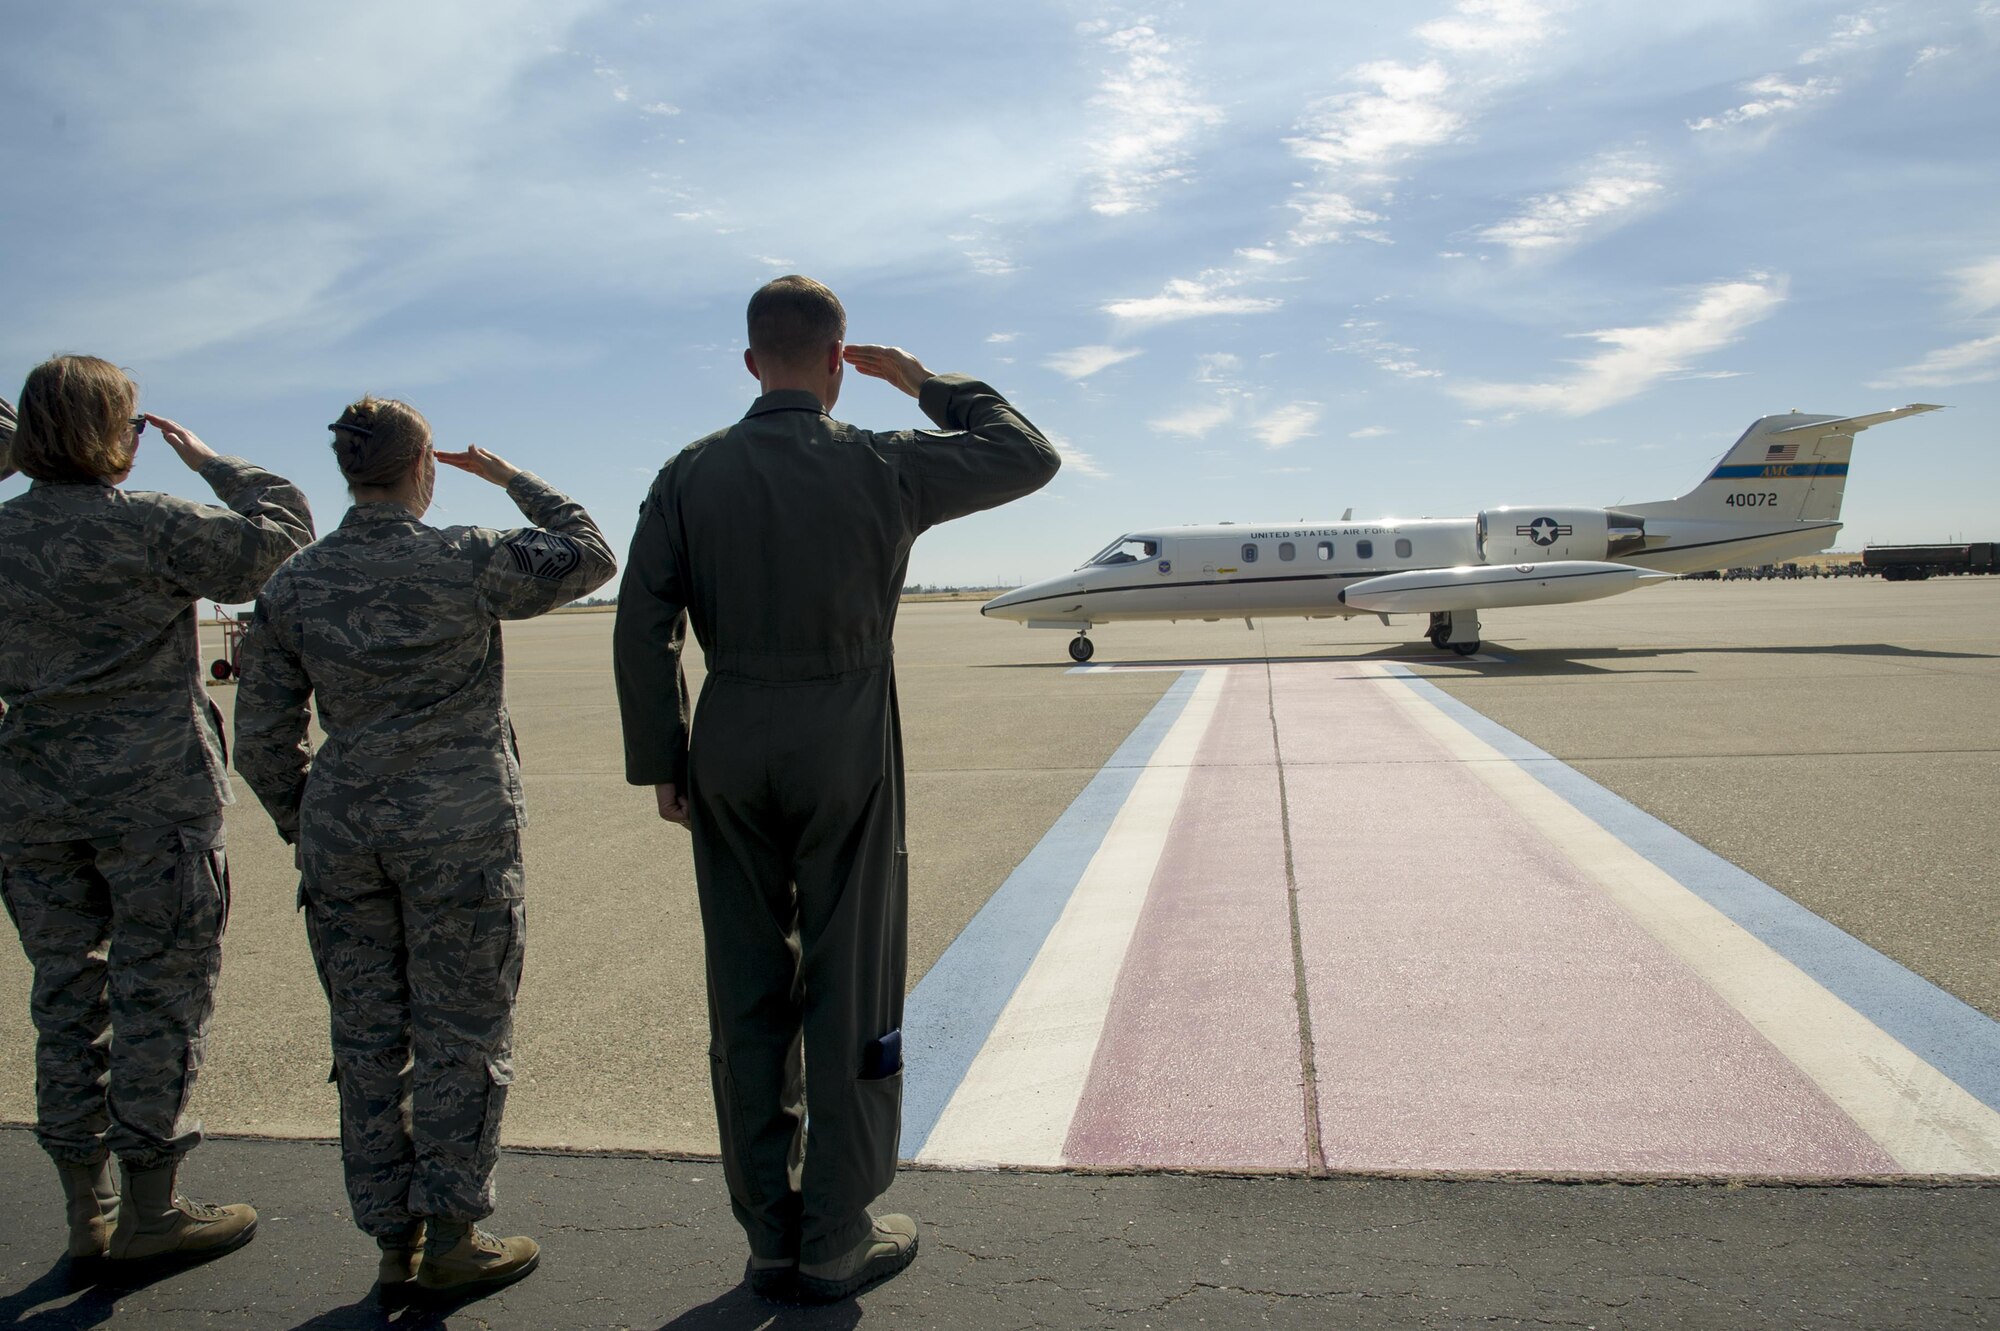 Beale Air Force Base senior leaders salute as the Air Force Reserve Command senior leaders arrive July 14, 2017, at Beale AFB, California. It was the first AFRC senior leader visit in seven years. (U.S. Air Force photo by Senior Airman Tara R. Abrahams)